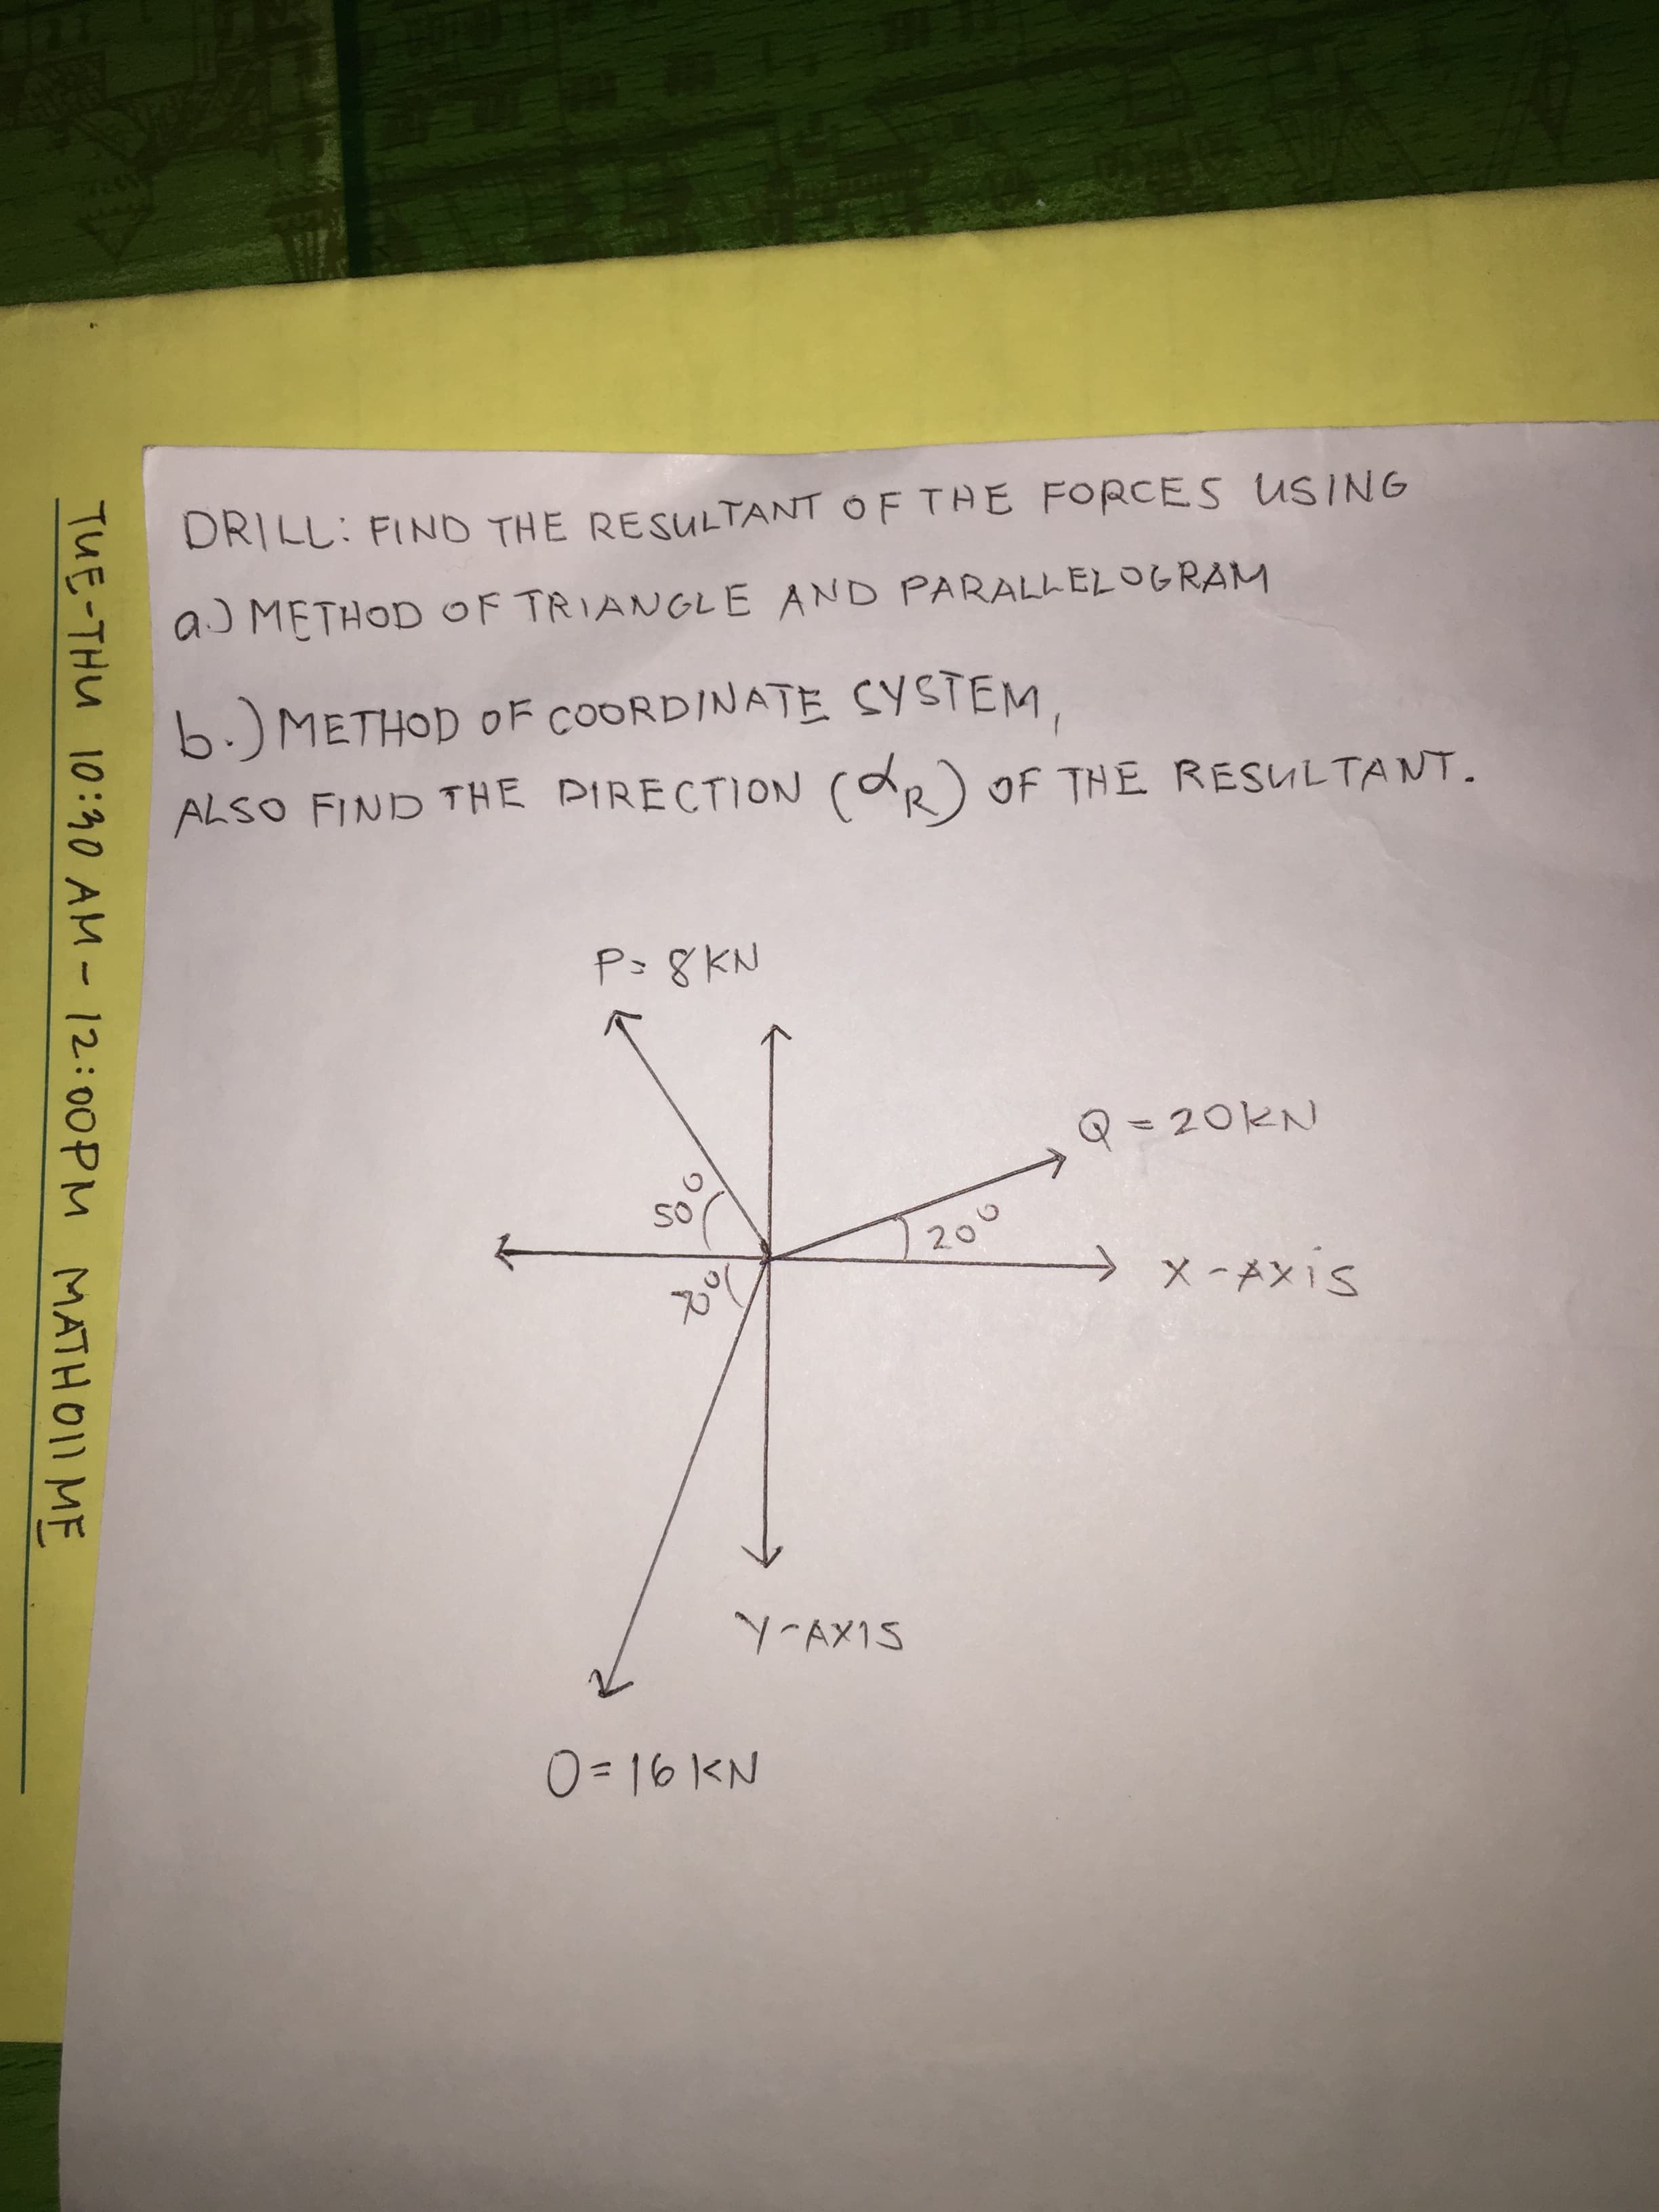 DRILL: FIND THE RESULTANT OF TAE FORCES USING
a METHOD OF TRIANGLE AND PARALL ELOGRAM
6.METHOD OF COORDINATE CY STEM
ALSO FIND THE PIRECTION (R OF THE RESULTANT.
P- 8KN
Q20KN
20
X -AX1S
Y AXIS
0= 16 KN
TUE-THU 10:0 AM - 12:00PM MATHOI1 MF
